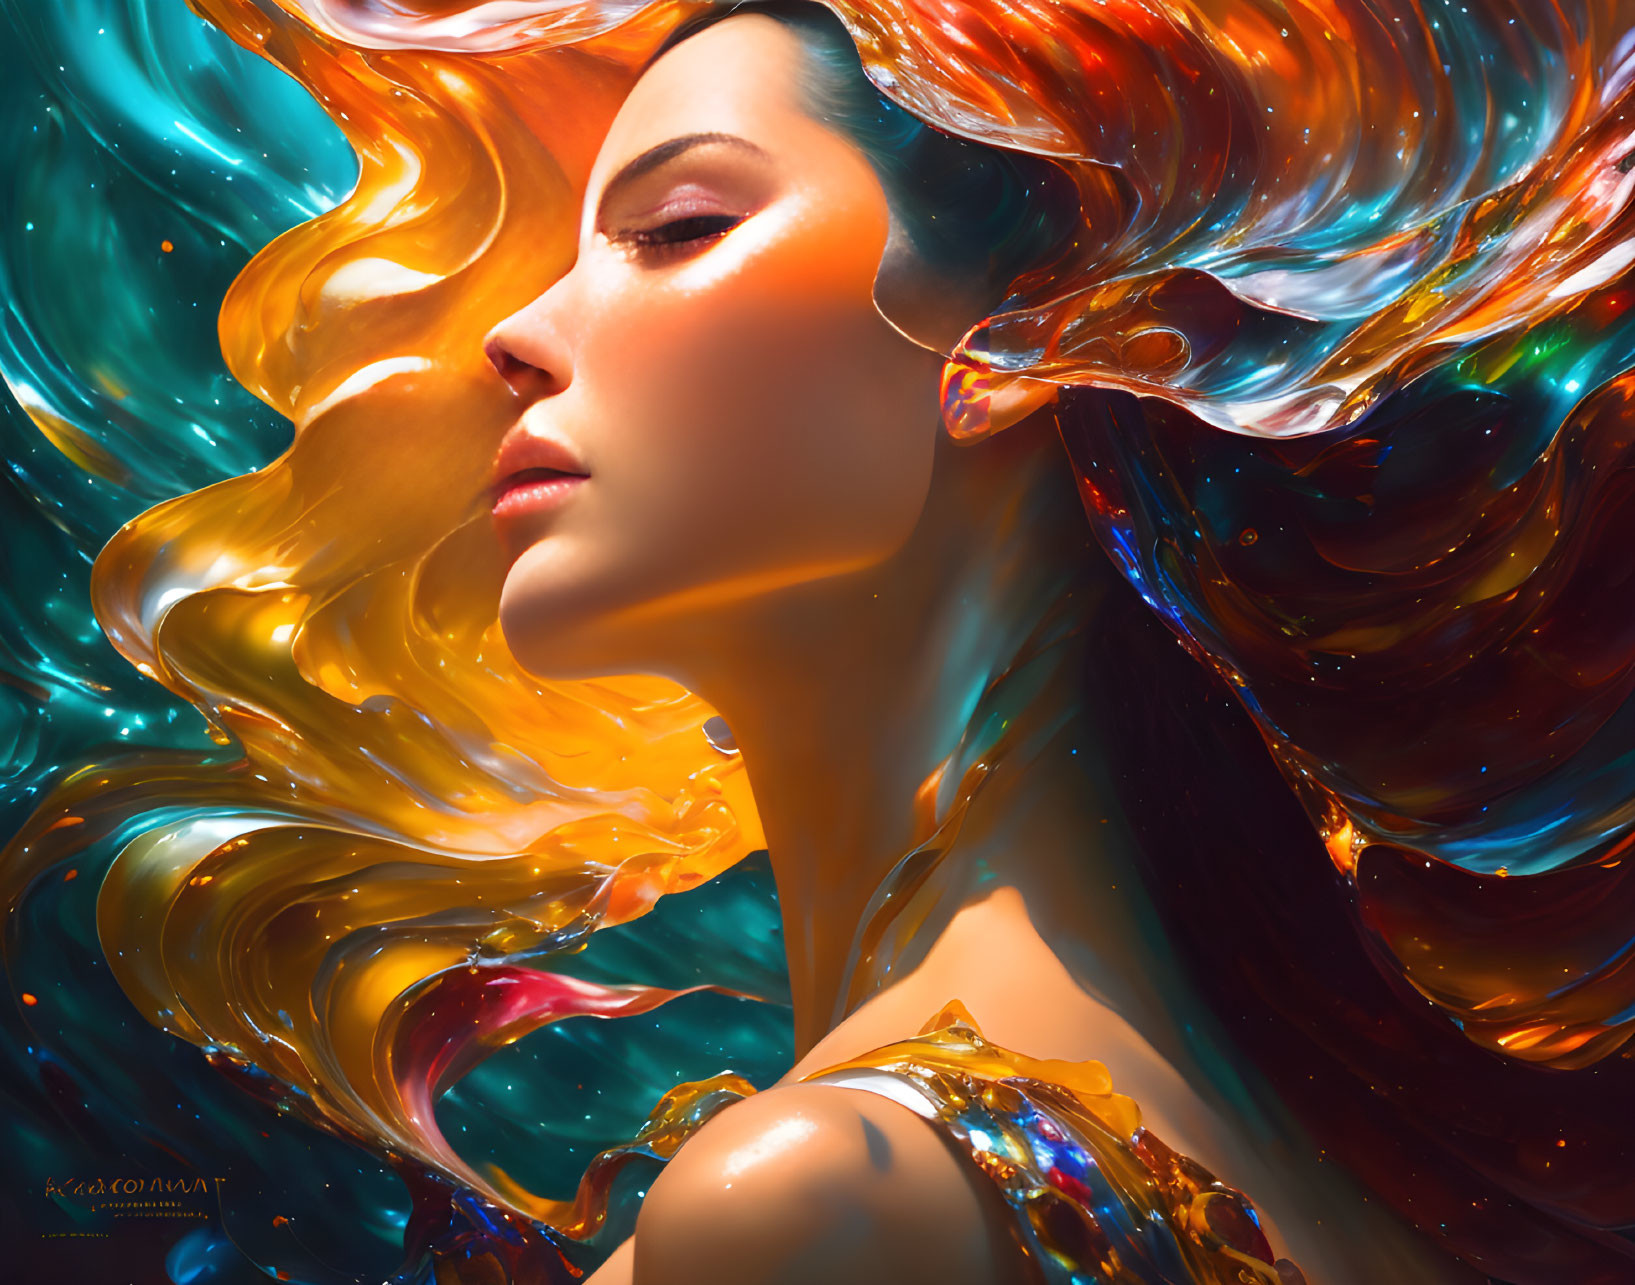 Vibrant surrealist portrait of a woman with flowing liquid-like hair